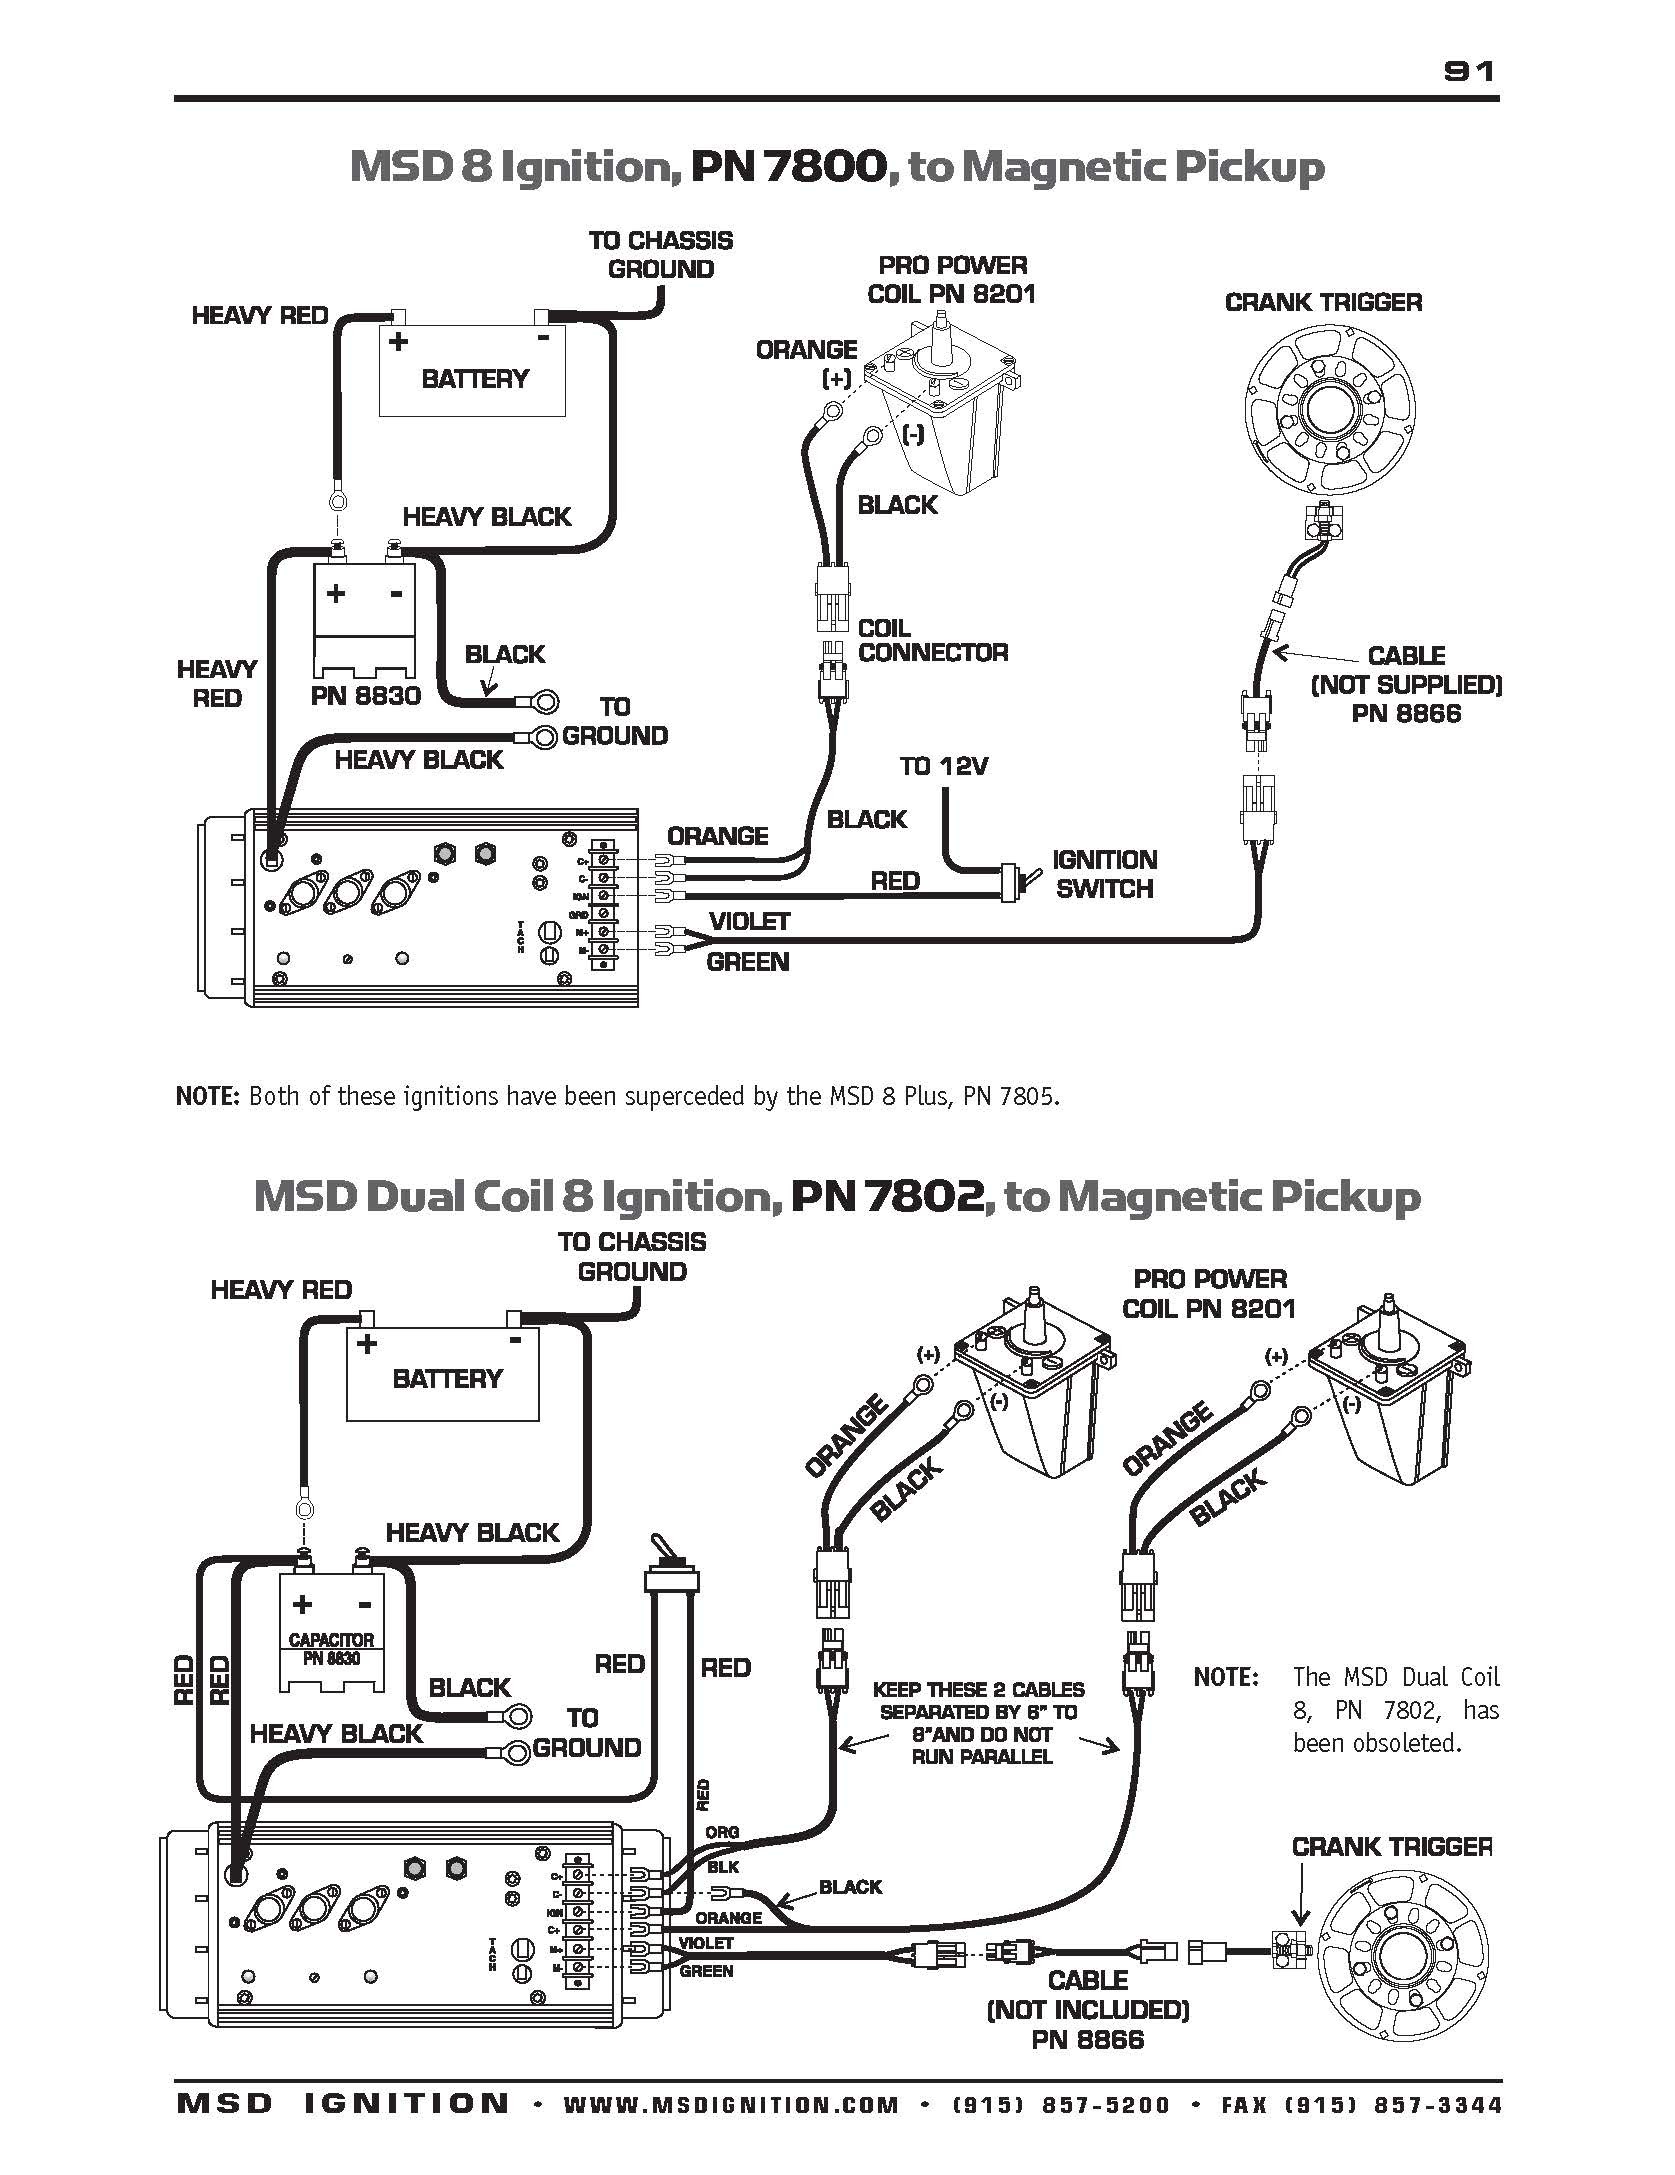 Pro p PC6AL 2 Multi Spark CDI Ignition Box And Pro p Throughout Distributor Wiring Diagram